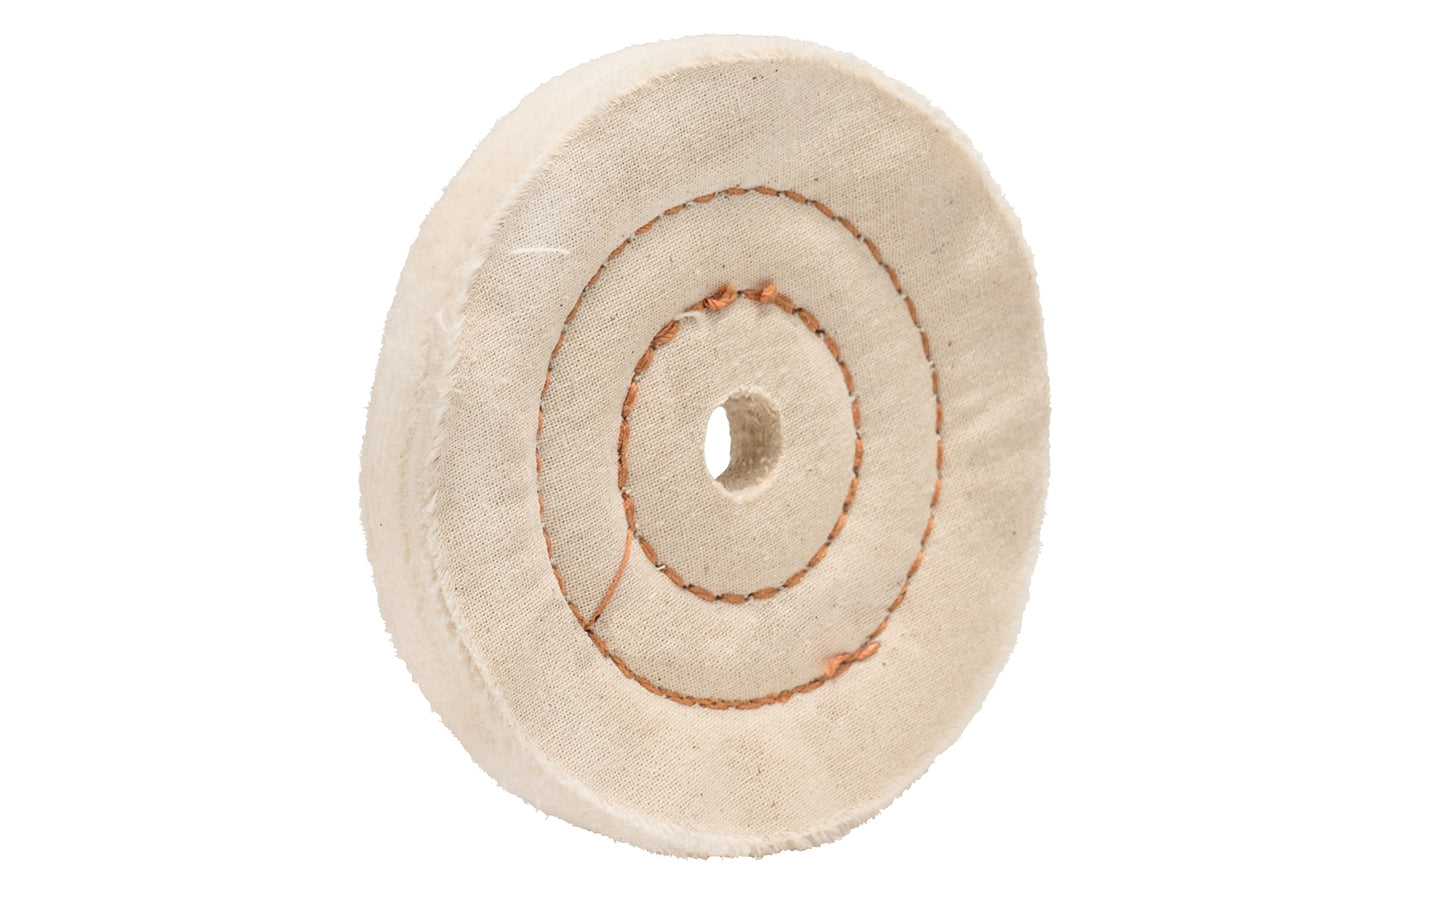 The 4" Cushion Sewn Buffing Wheel ~ 1/2" Thick is ideal for light cutting & coloring (polishing). 4" diameter of wheel. 1/2" hole diameter. Made of fine cotton sheeting held together with two circles of lockstitch sewing. Made in USA.